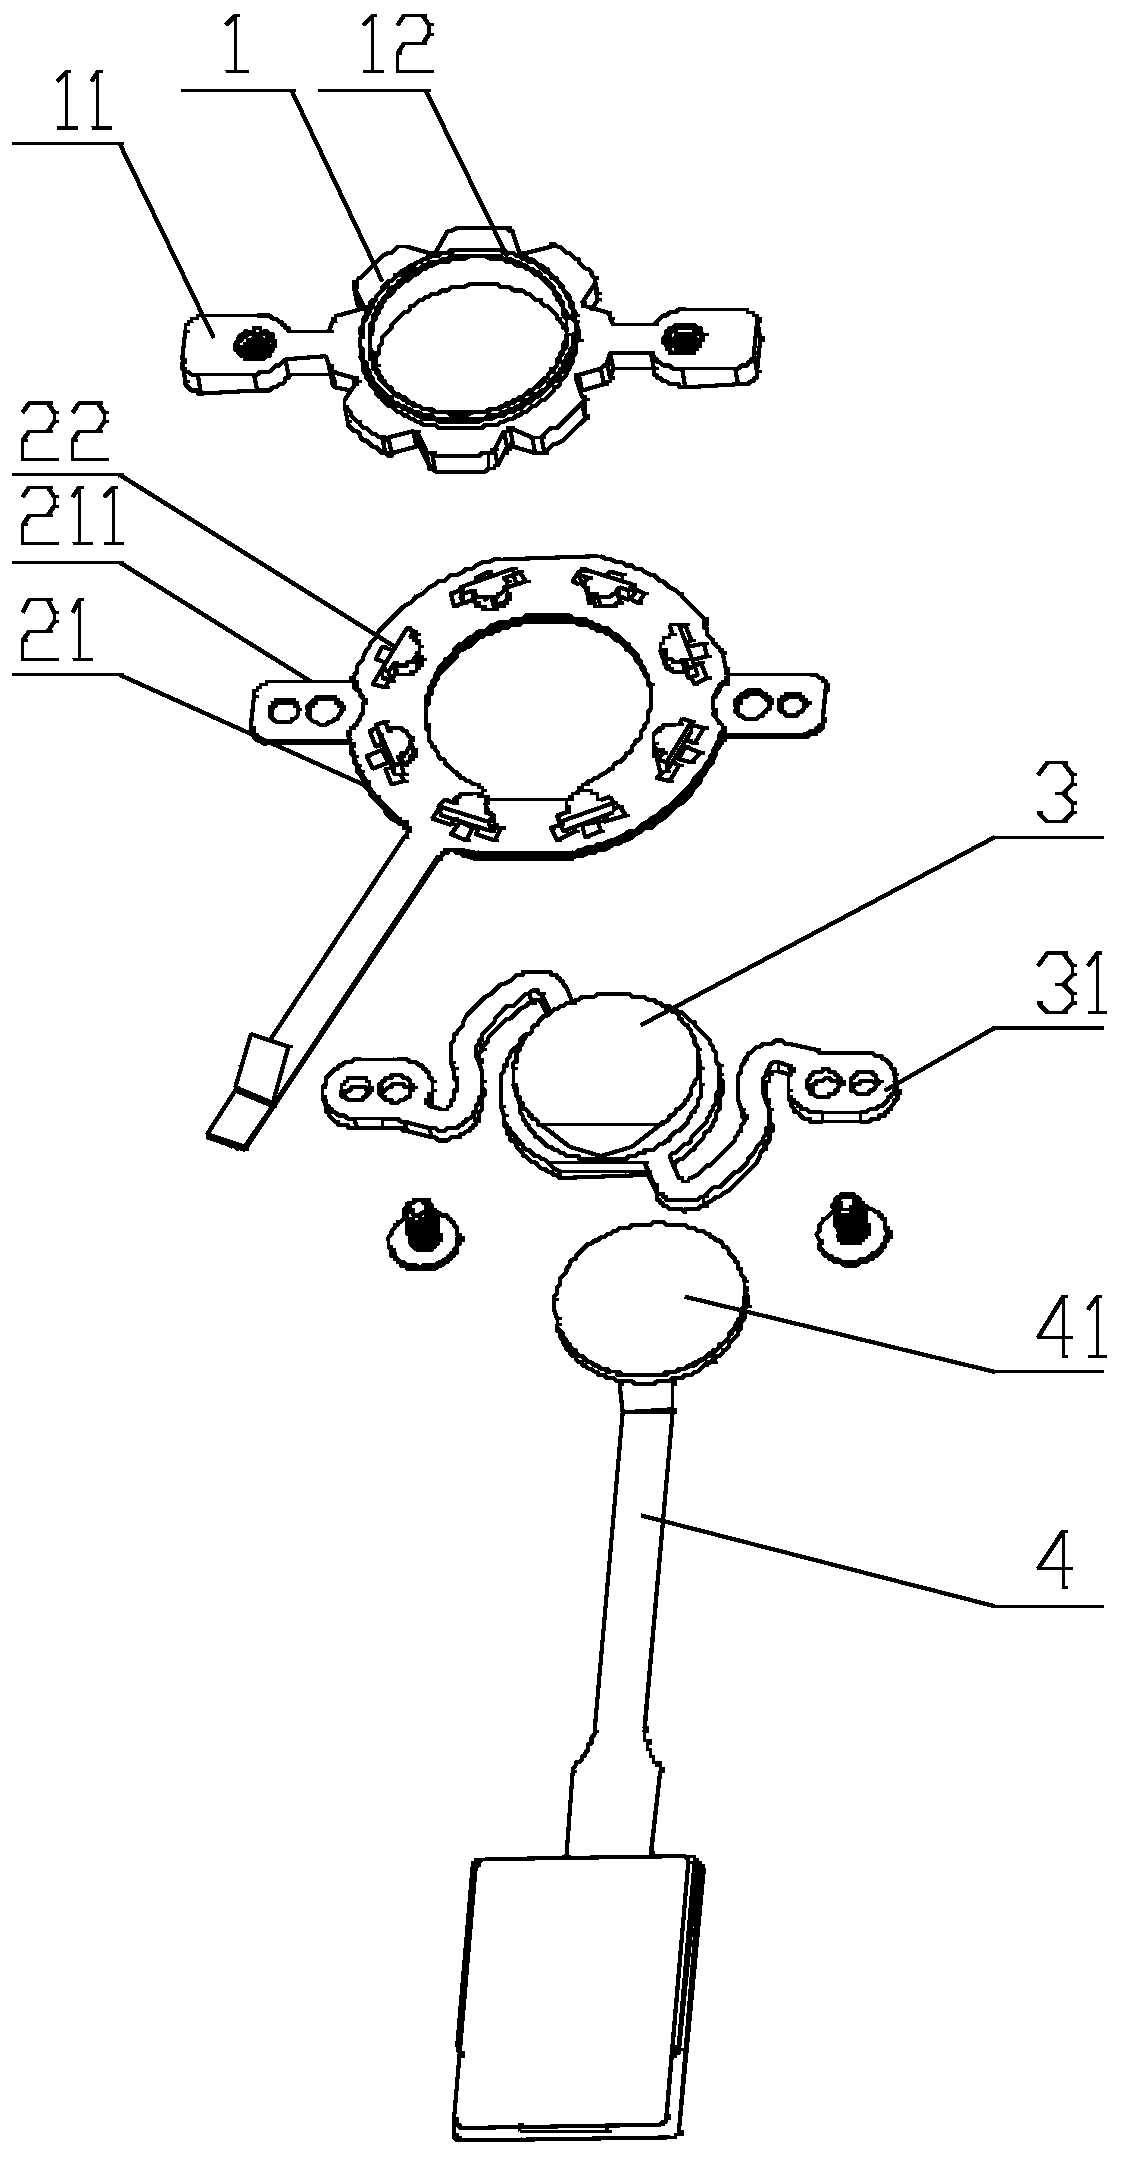 Whole-circle light assembly and key module with whole-circle light effect